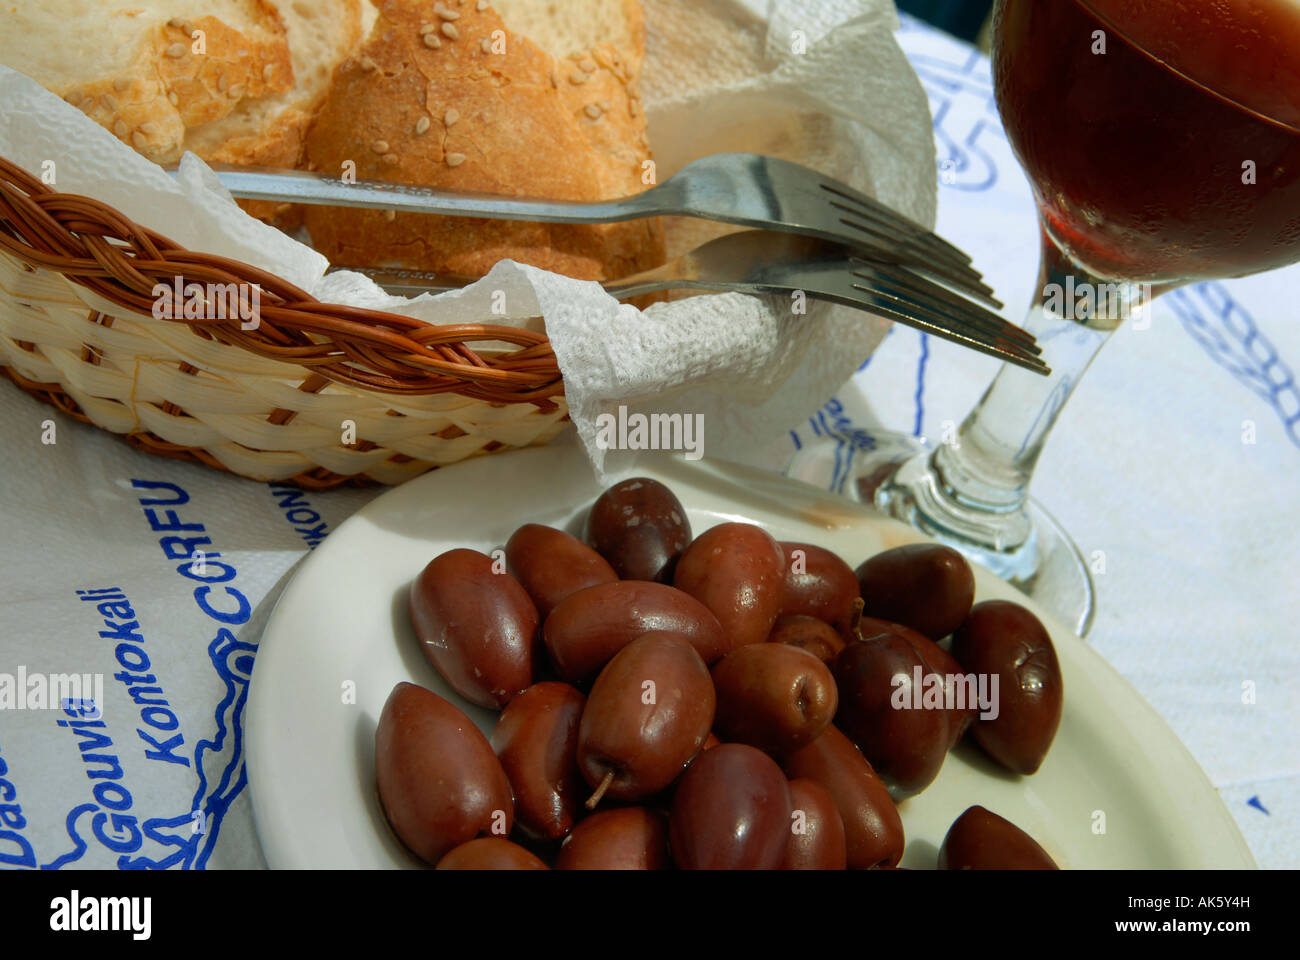 Restaurant table in Corfu laid with a simple Greek meal of bread olives and wine Stock Photo